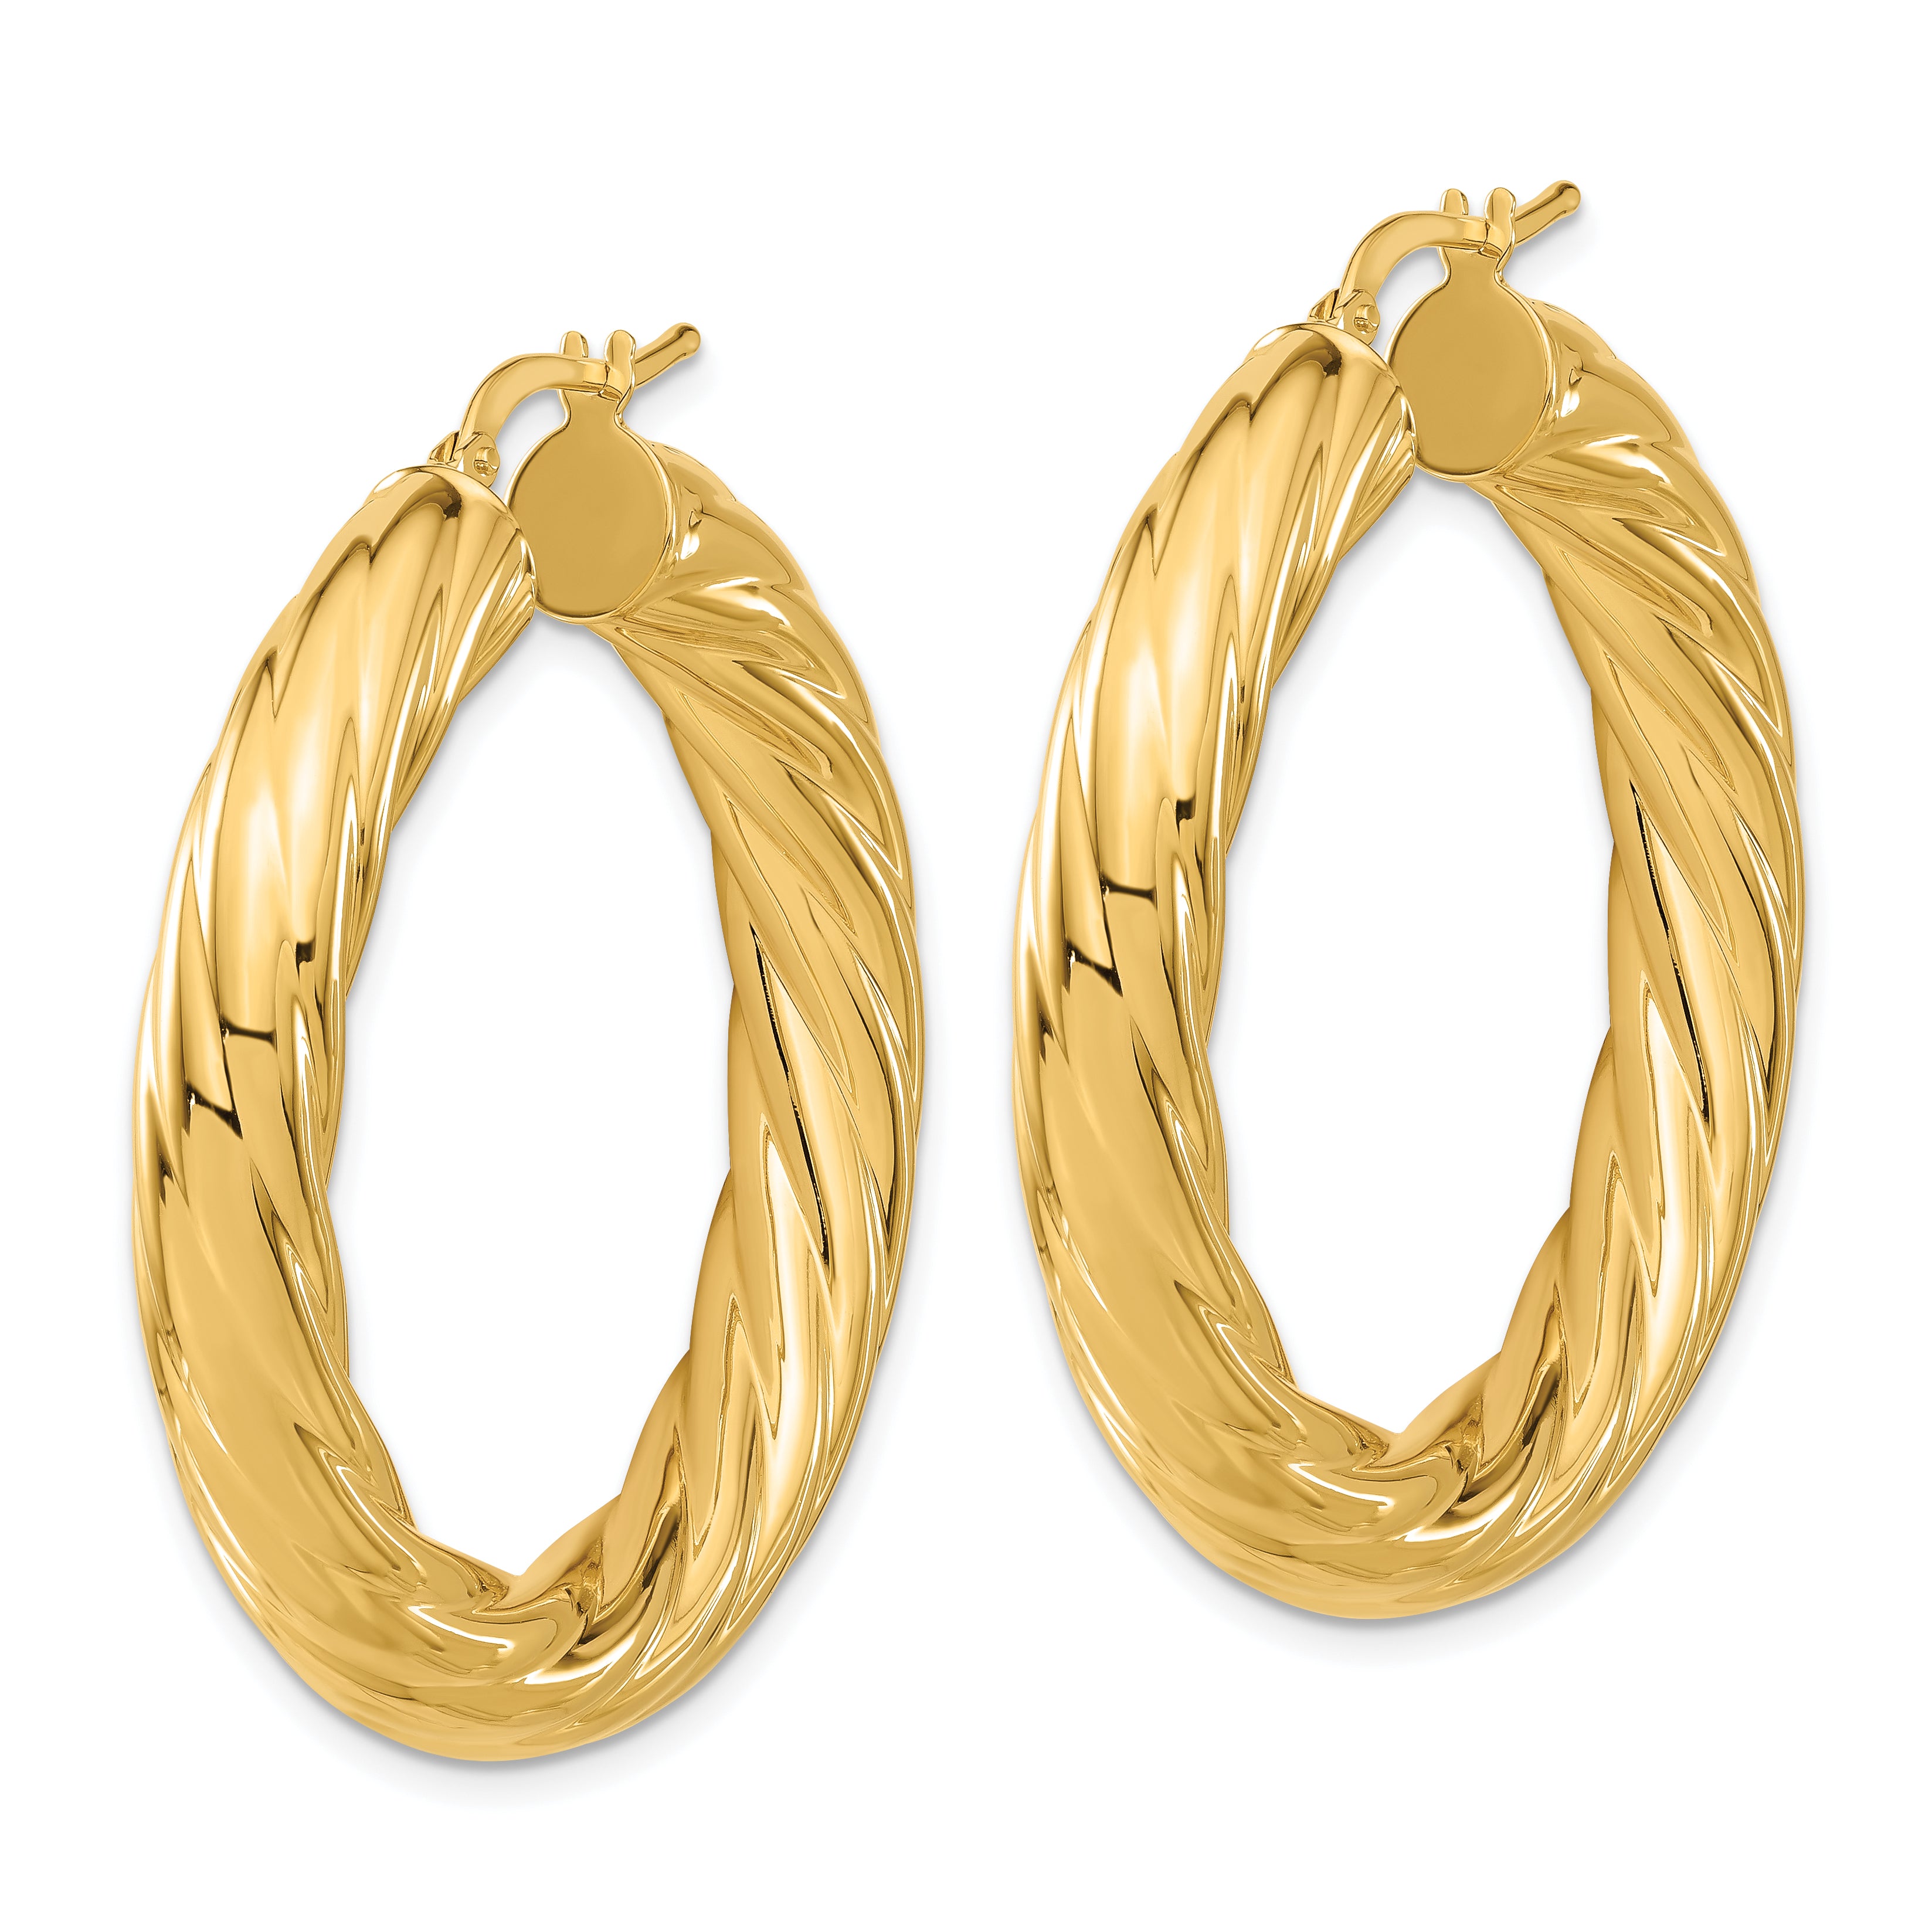 Bronze Polished Twisted Striped Round Hoop Earrings